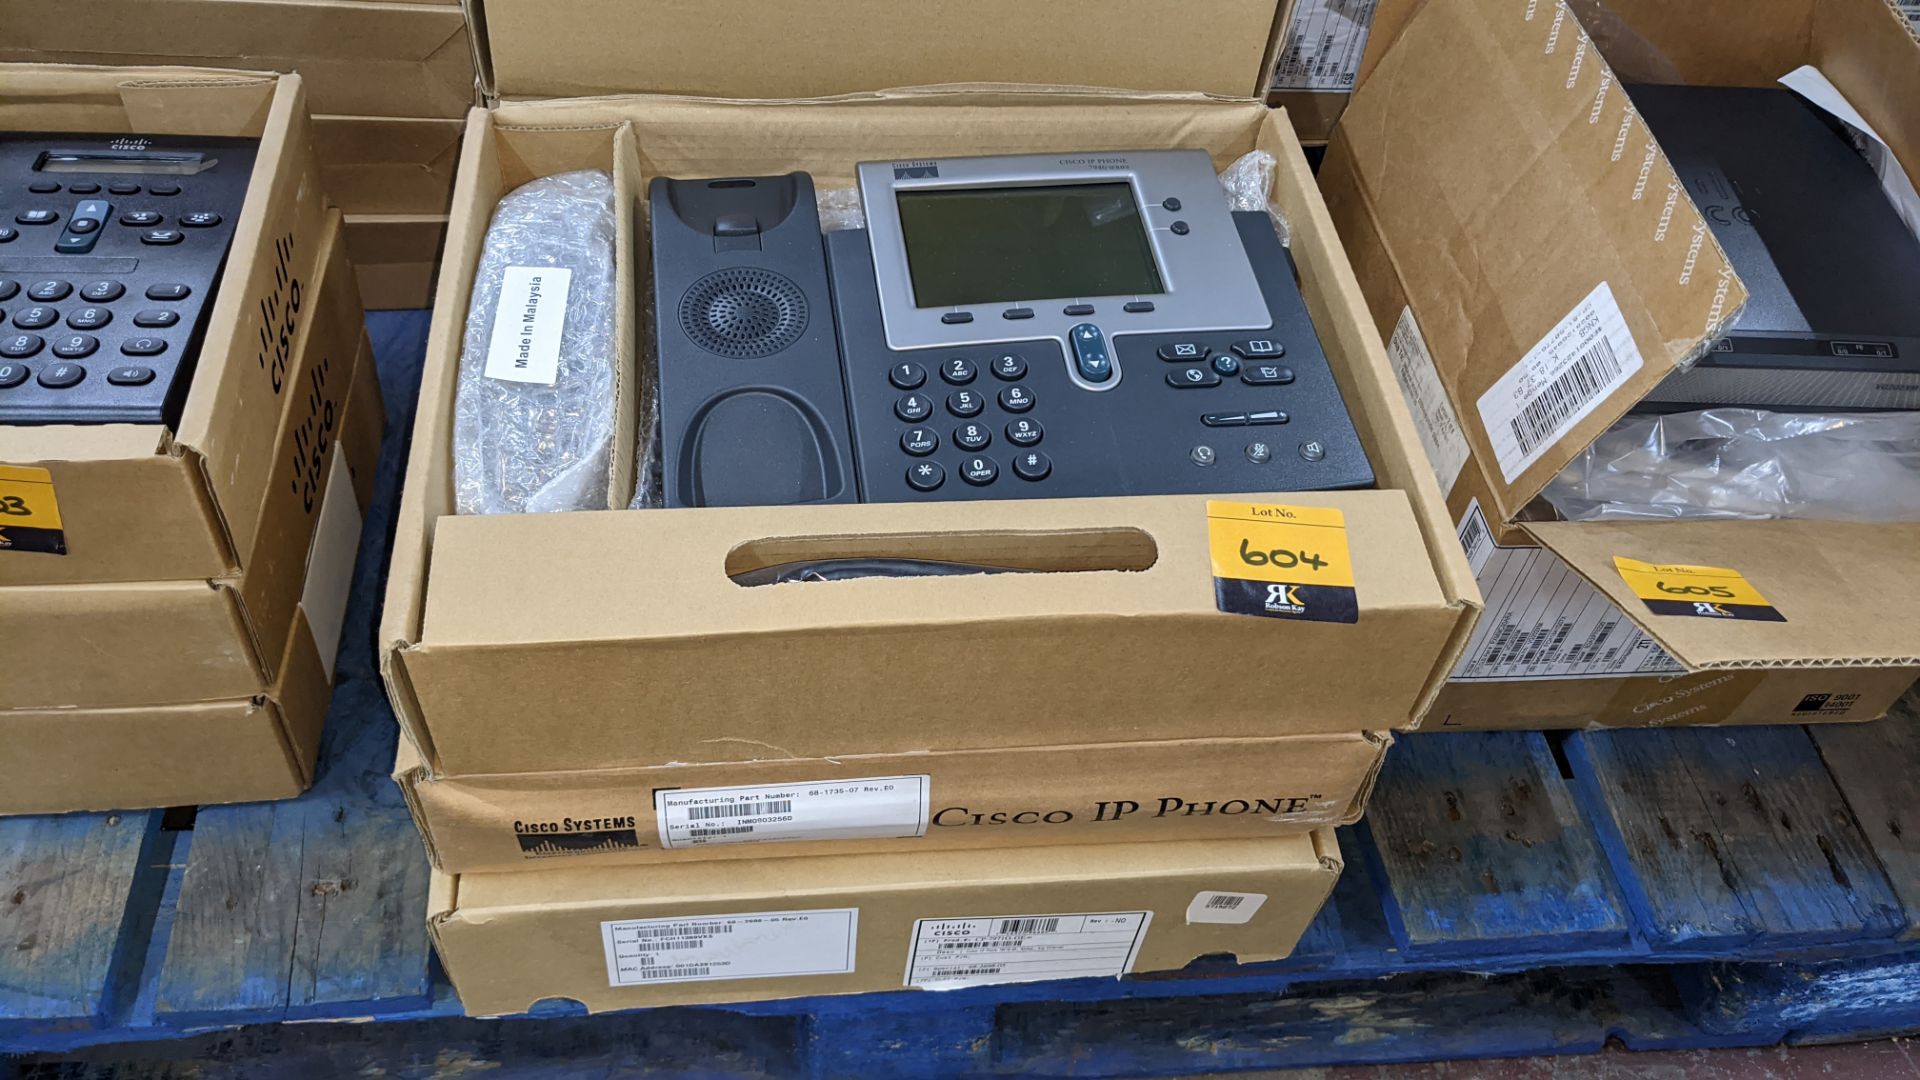 13 off Cisco handsets, model 7940, 7911 & 7971. Appear to be new & unused in Cisco branded boxes - Image 3 of 6